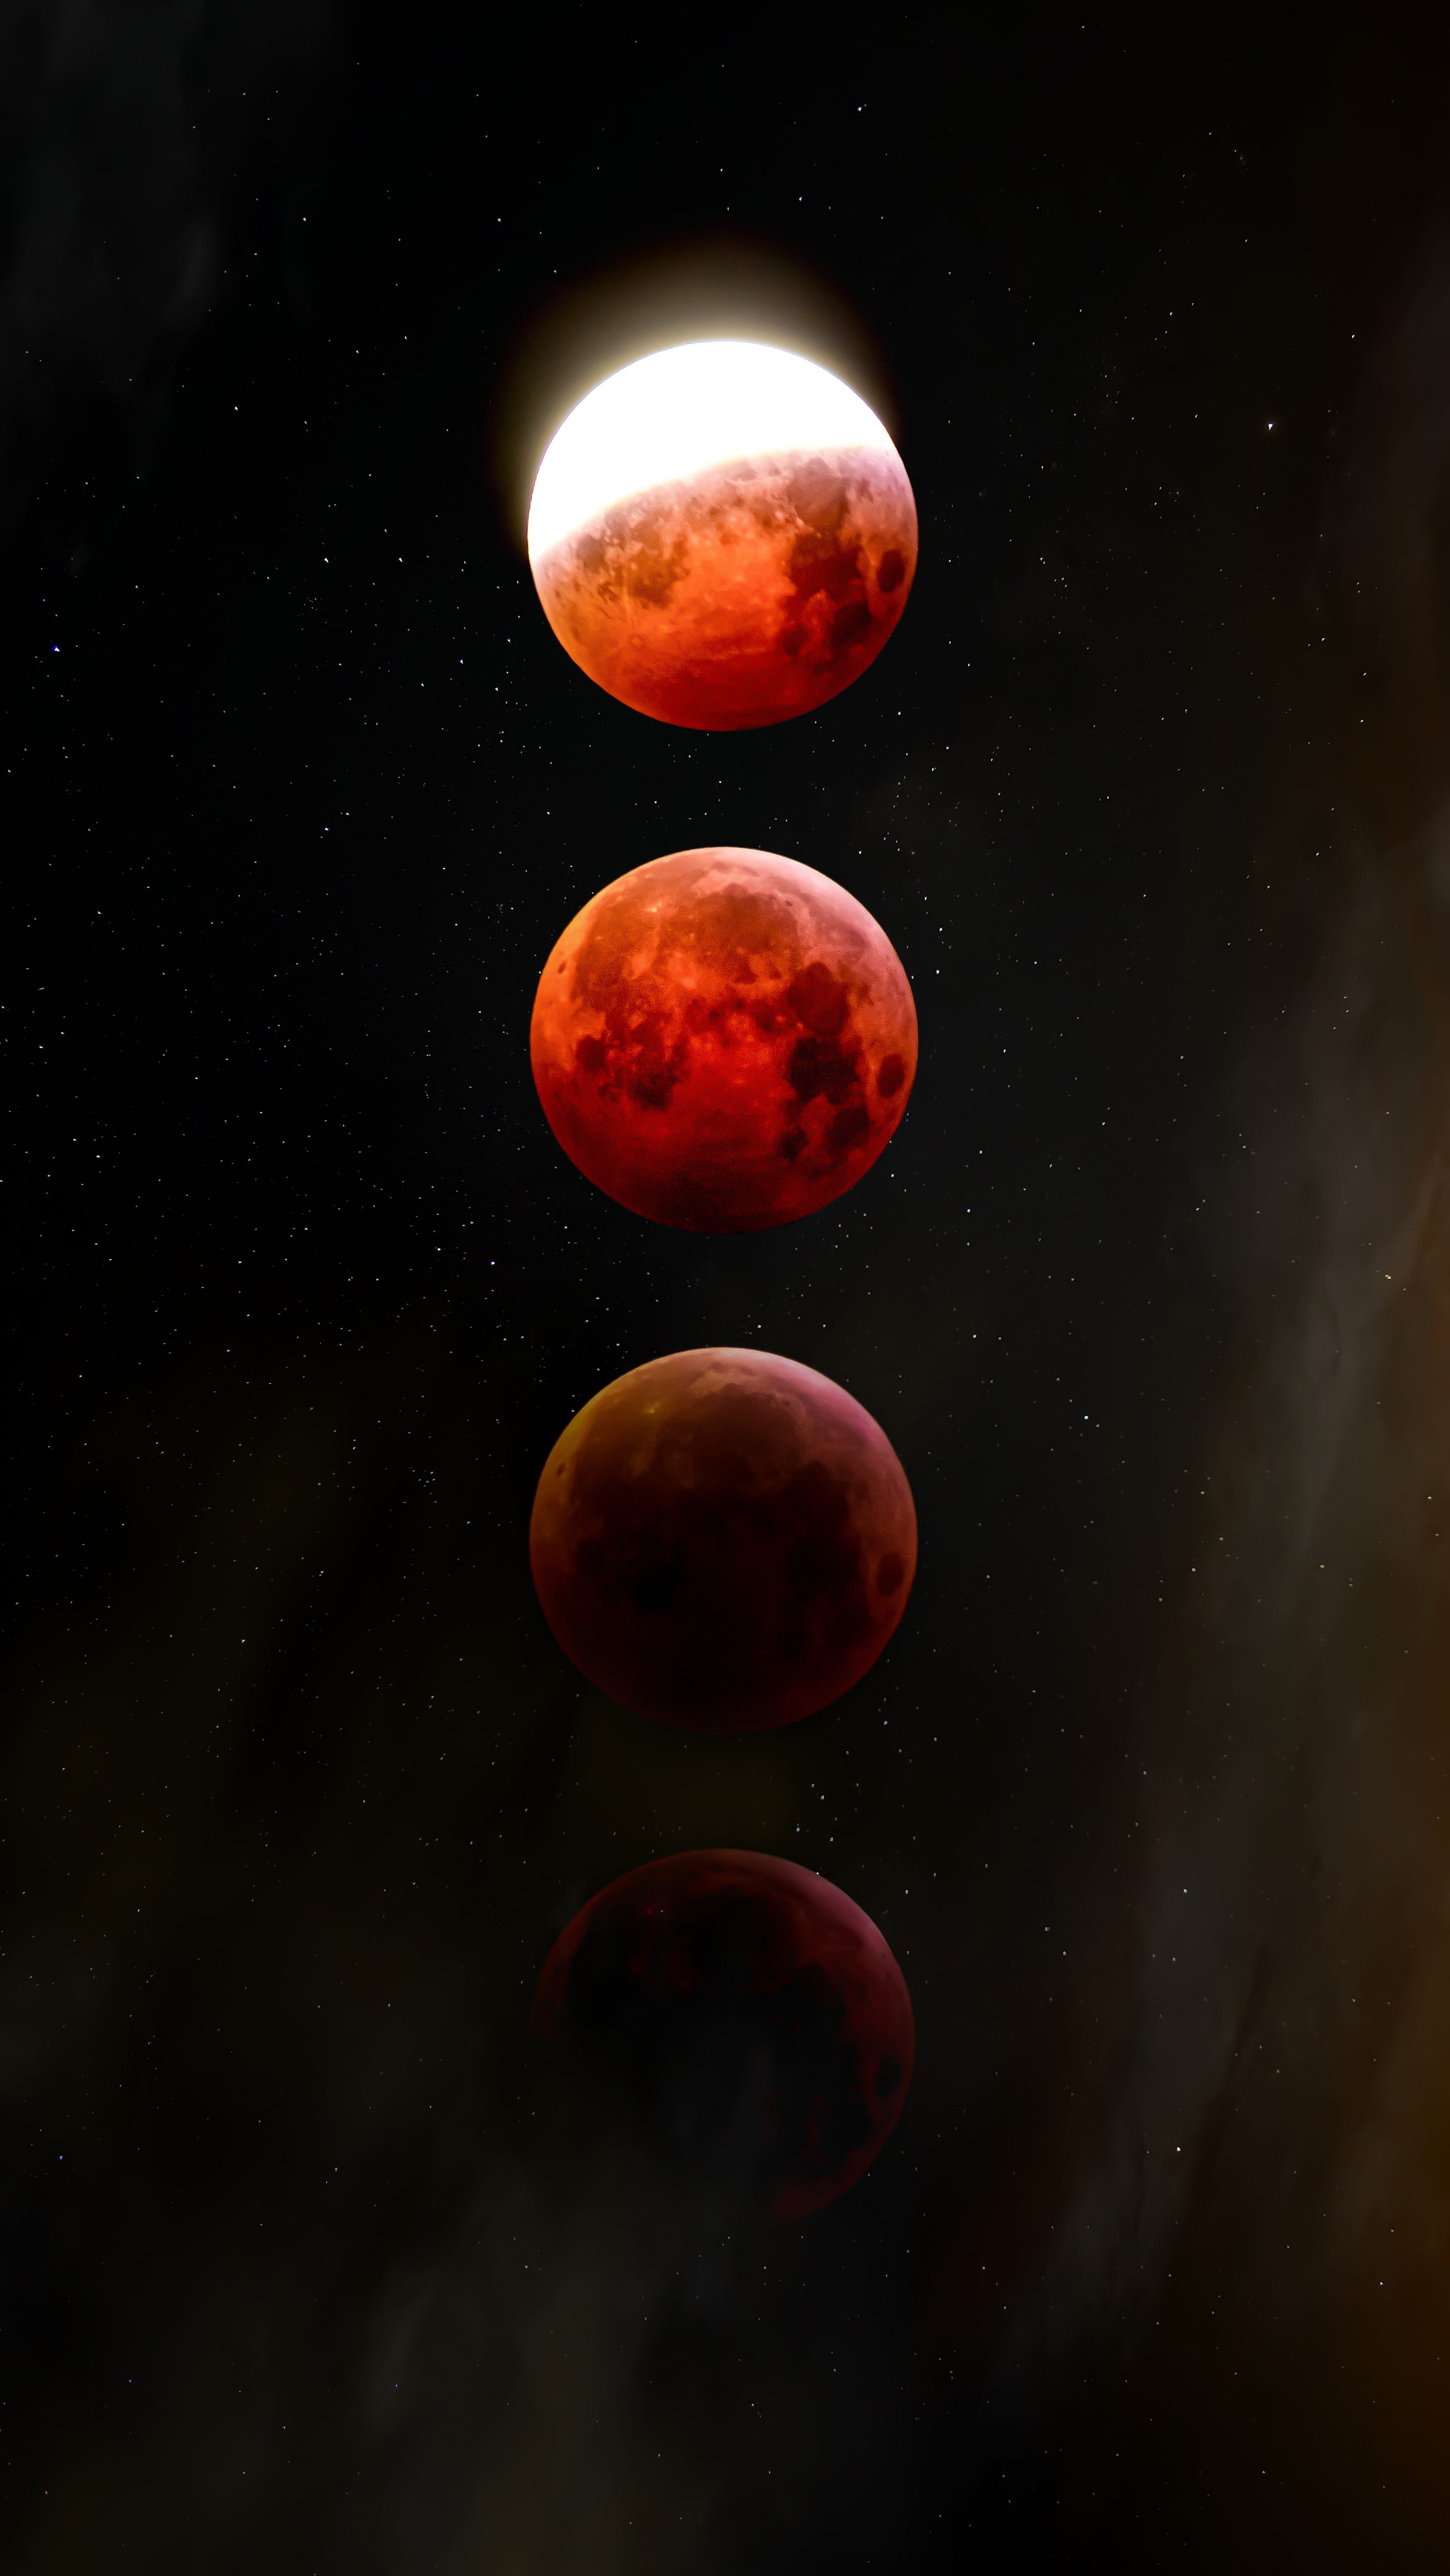 How can we see the rare “superblood moon” this weekend-